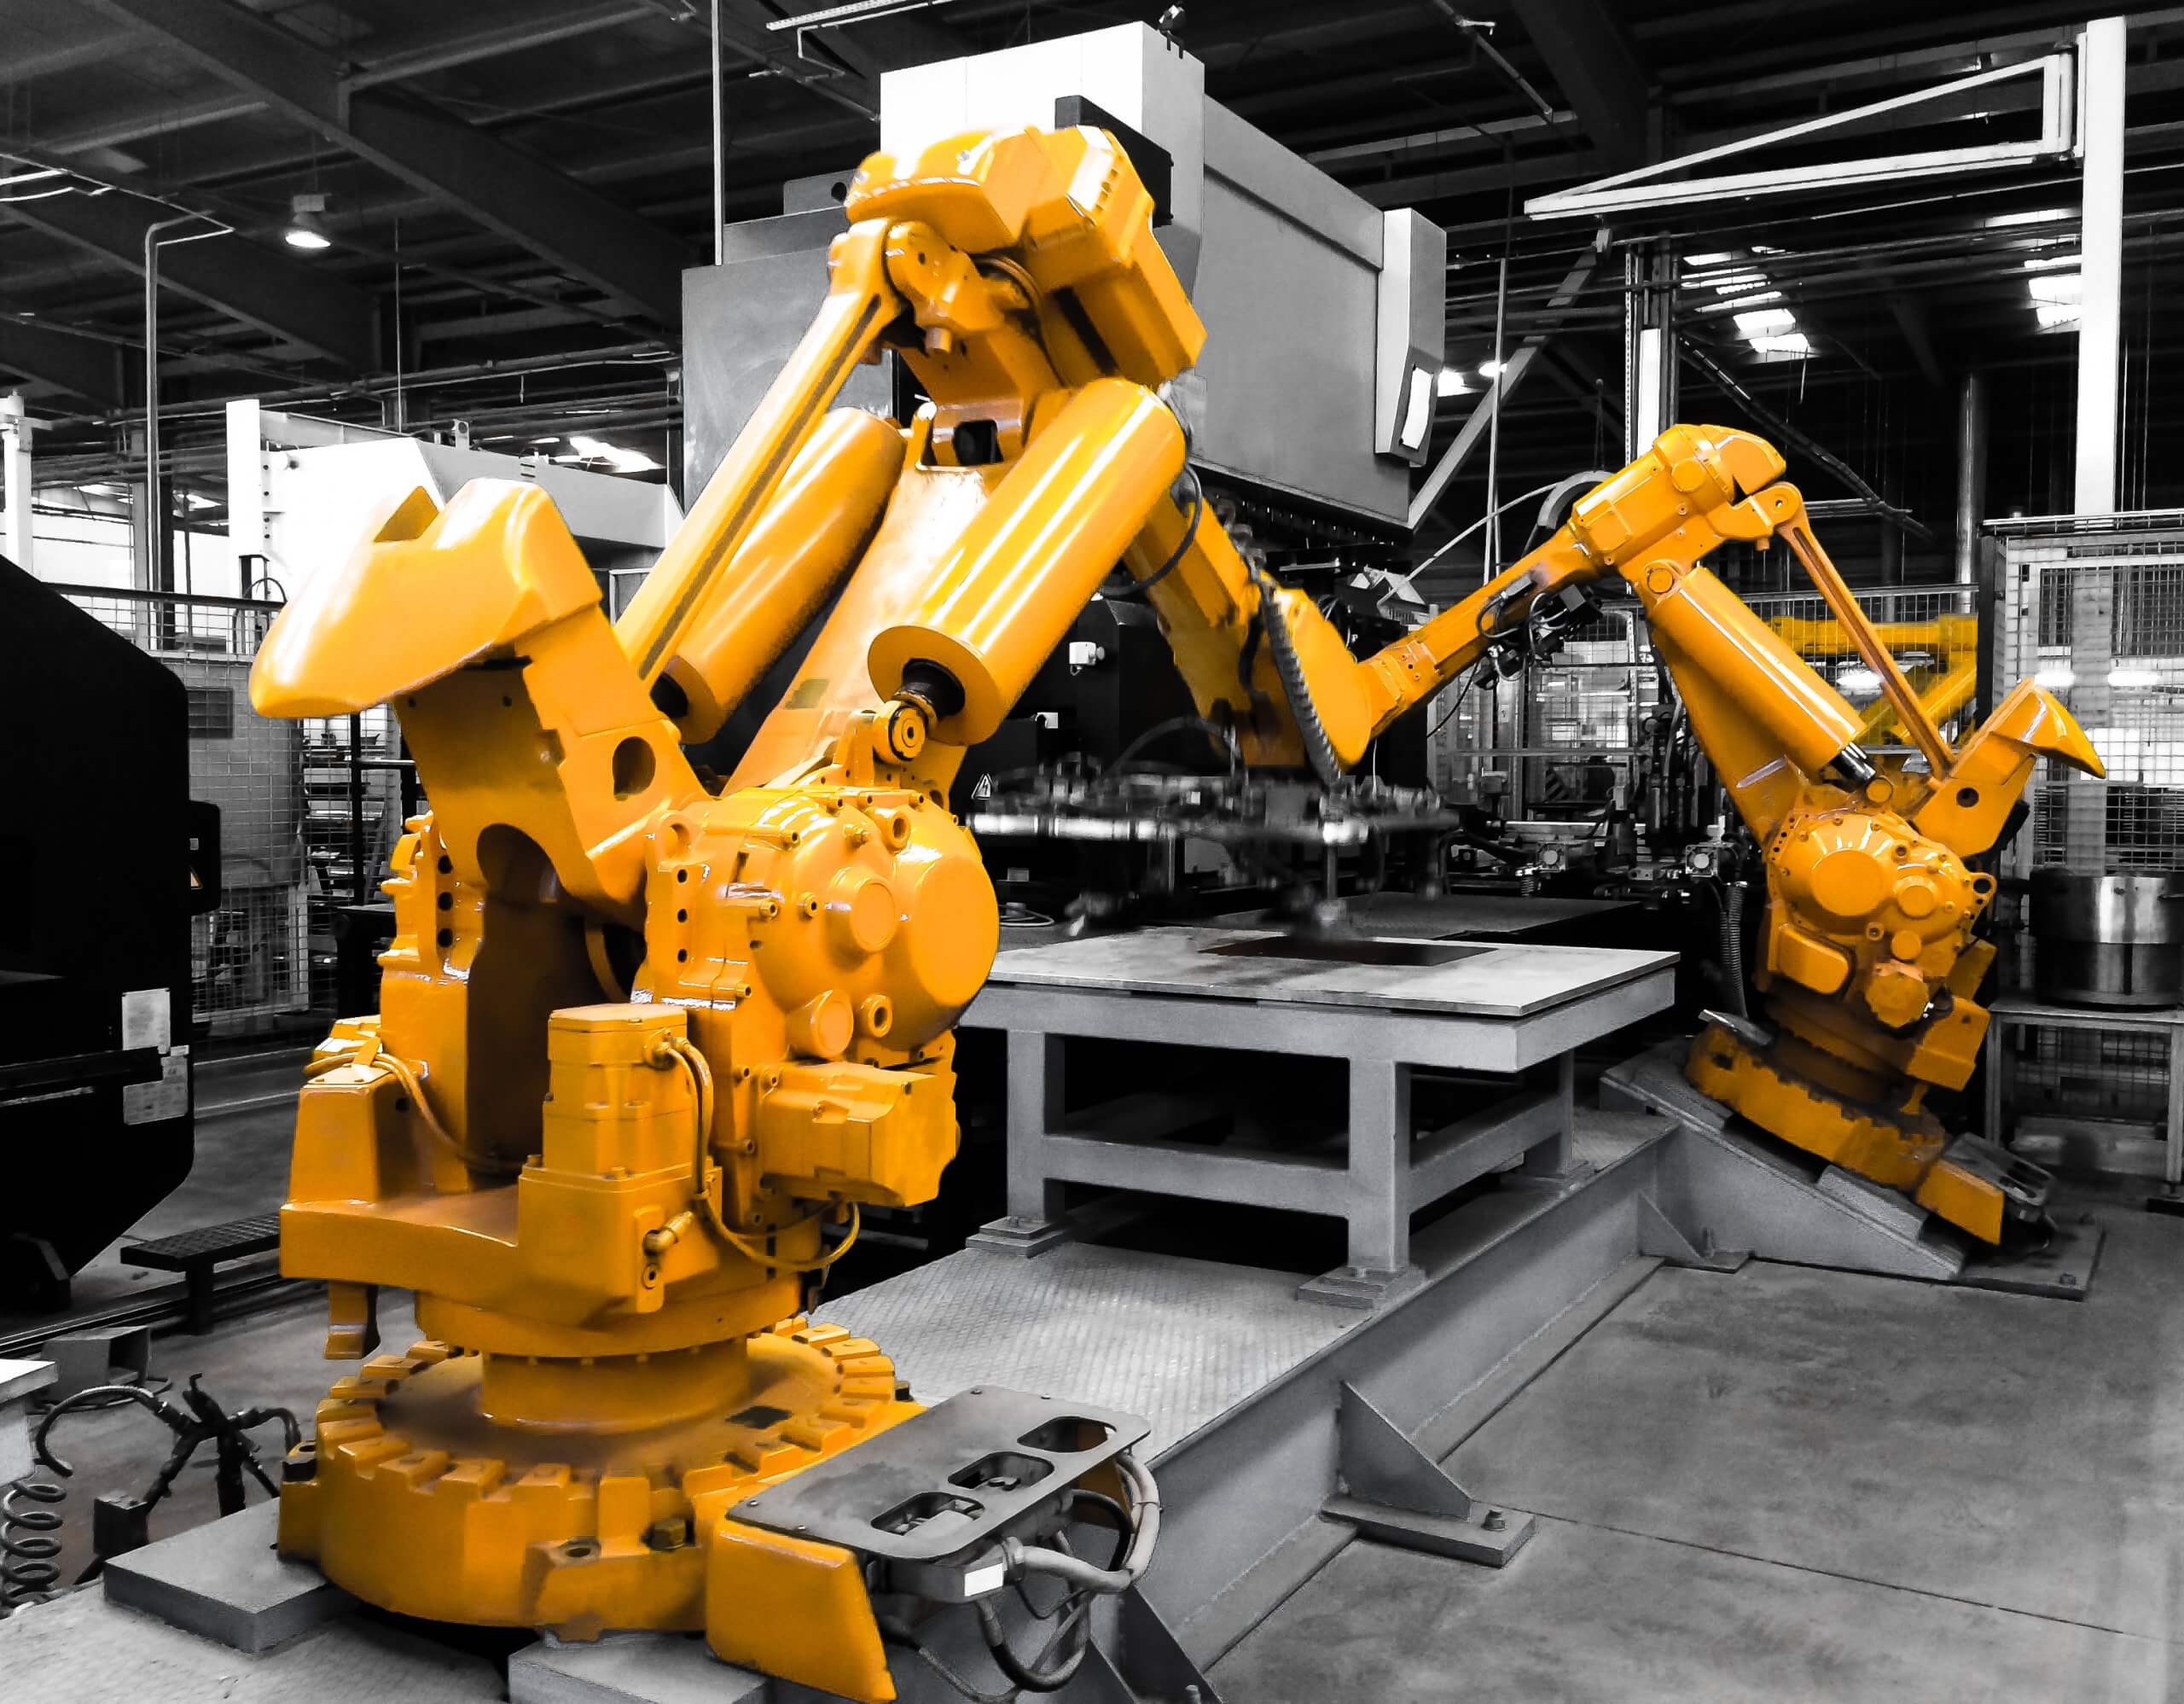 Industrial robots in production line manufacturer factory / Industrial robots in motion.